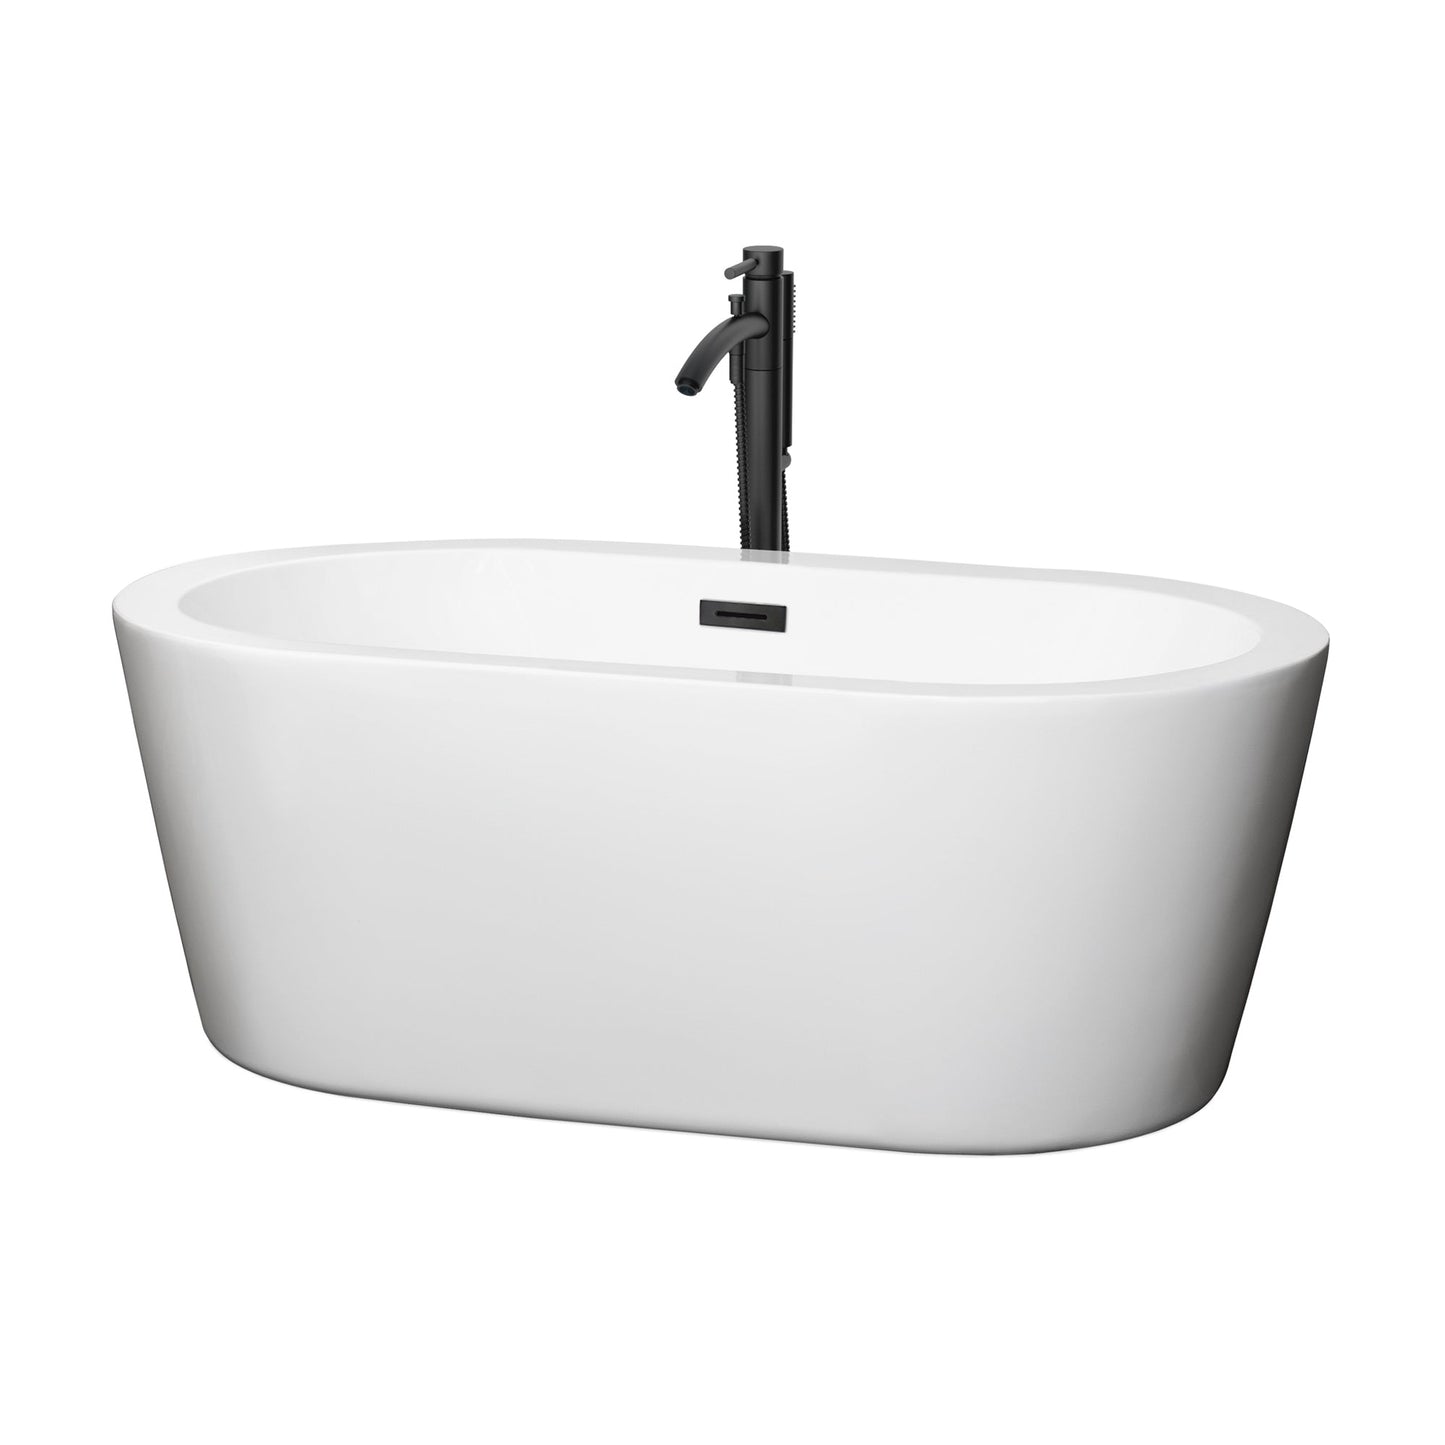 Wyndham Collection Mermaid 60" Freestanding Bathtub in White With Floor Mounted Faucet, Drain and Overflow Trim in Matte Black